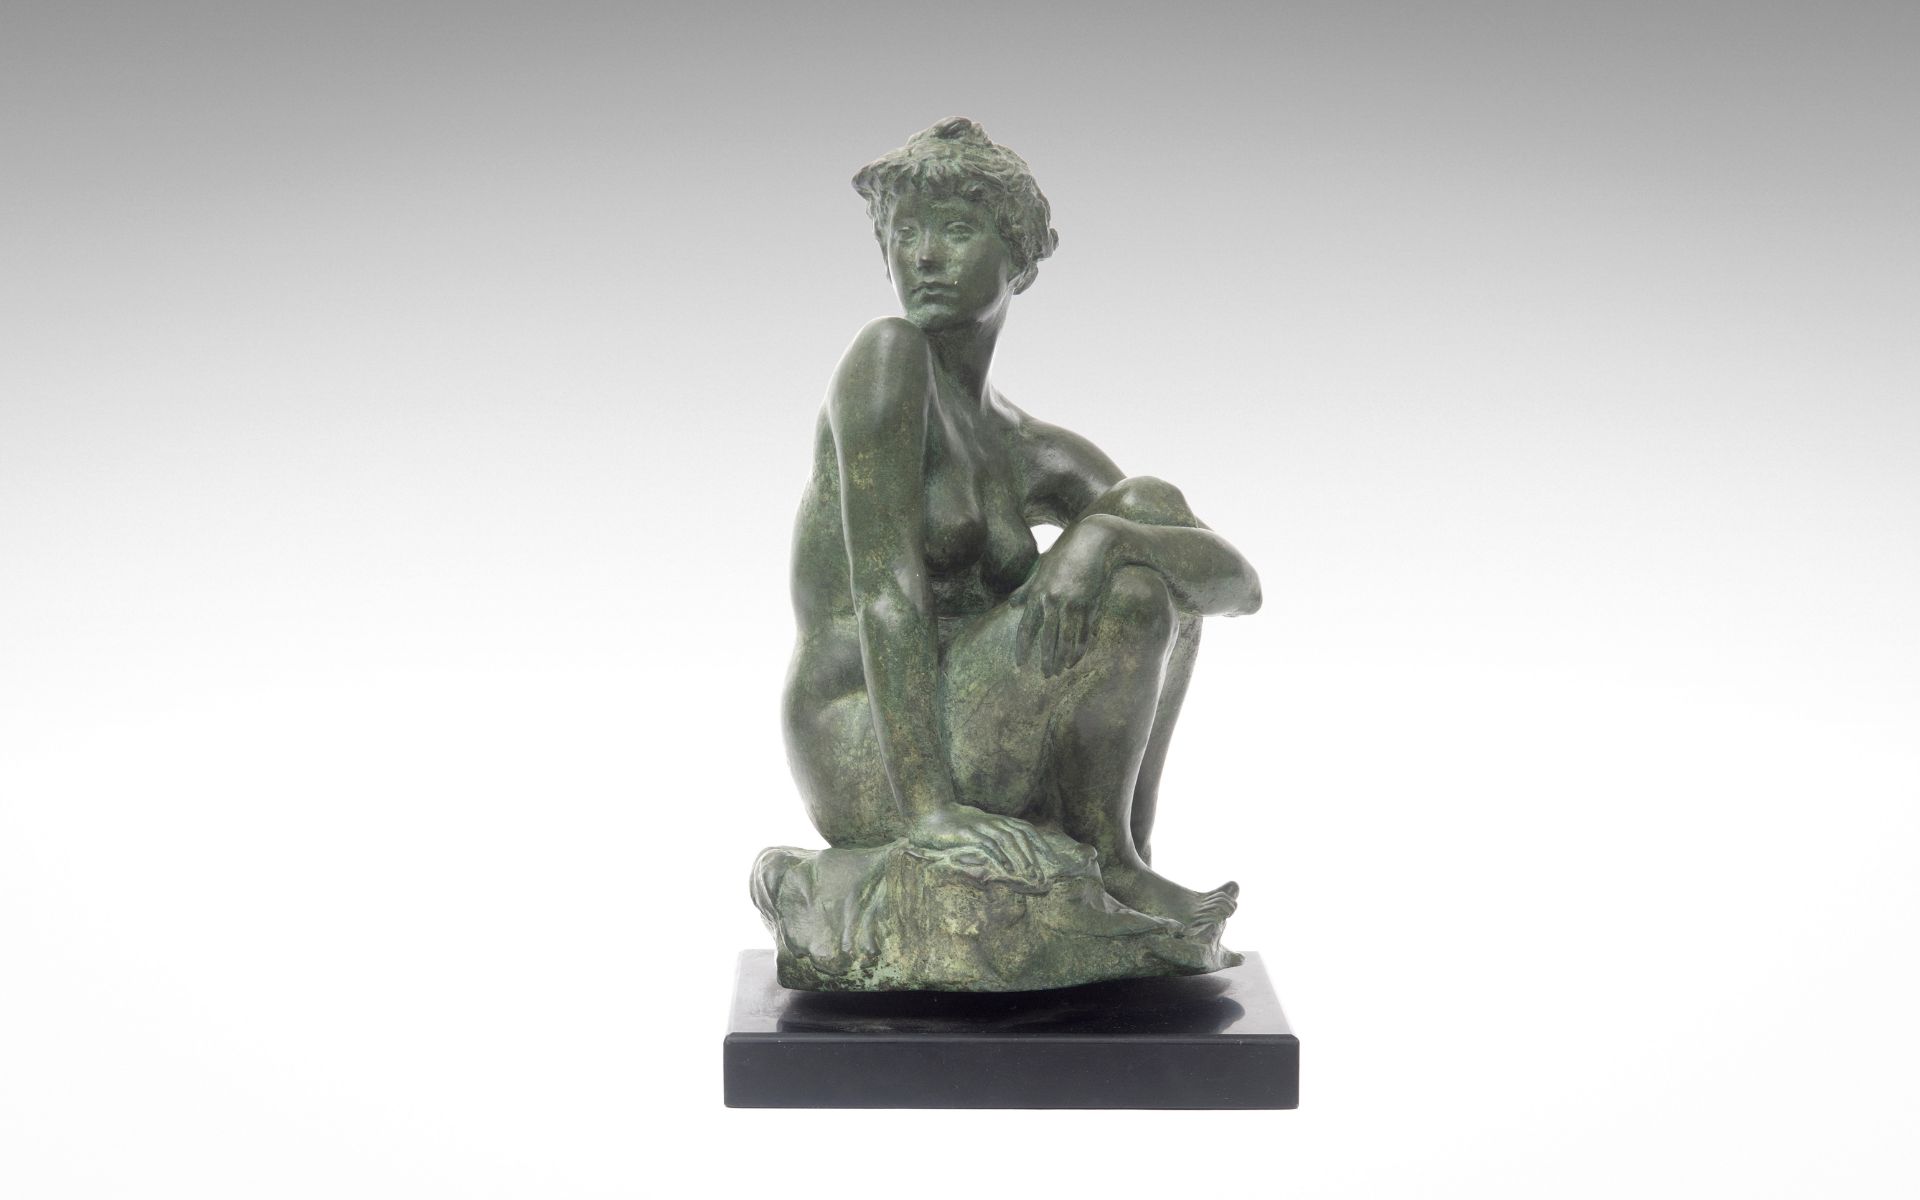 SIR WILLIAM REID DICK R.A. (BRITISH, 1879-1961): A BRONZE FIGURE OF A SEATED NUDE